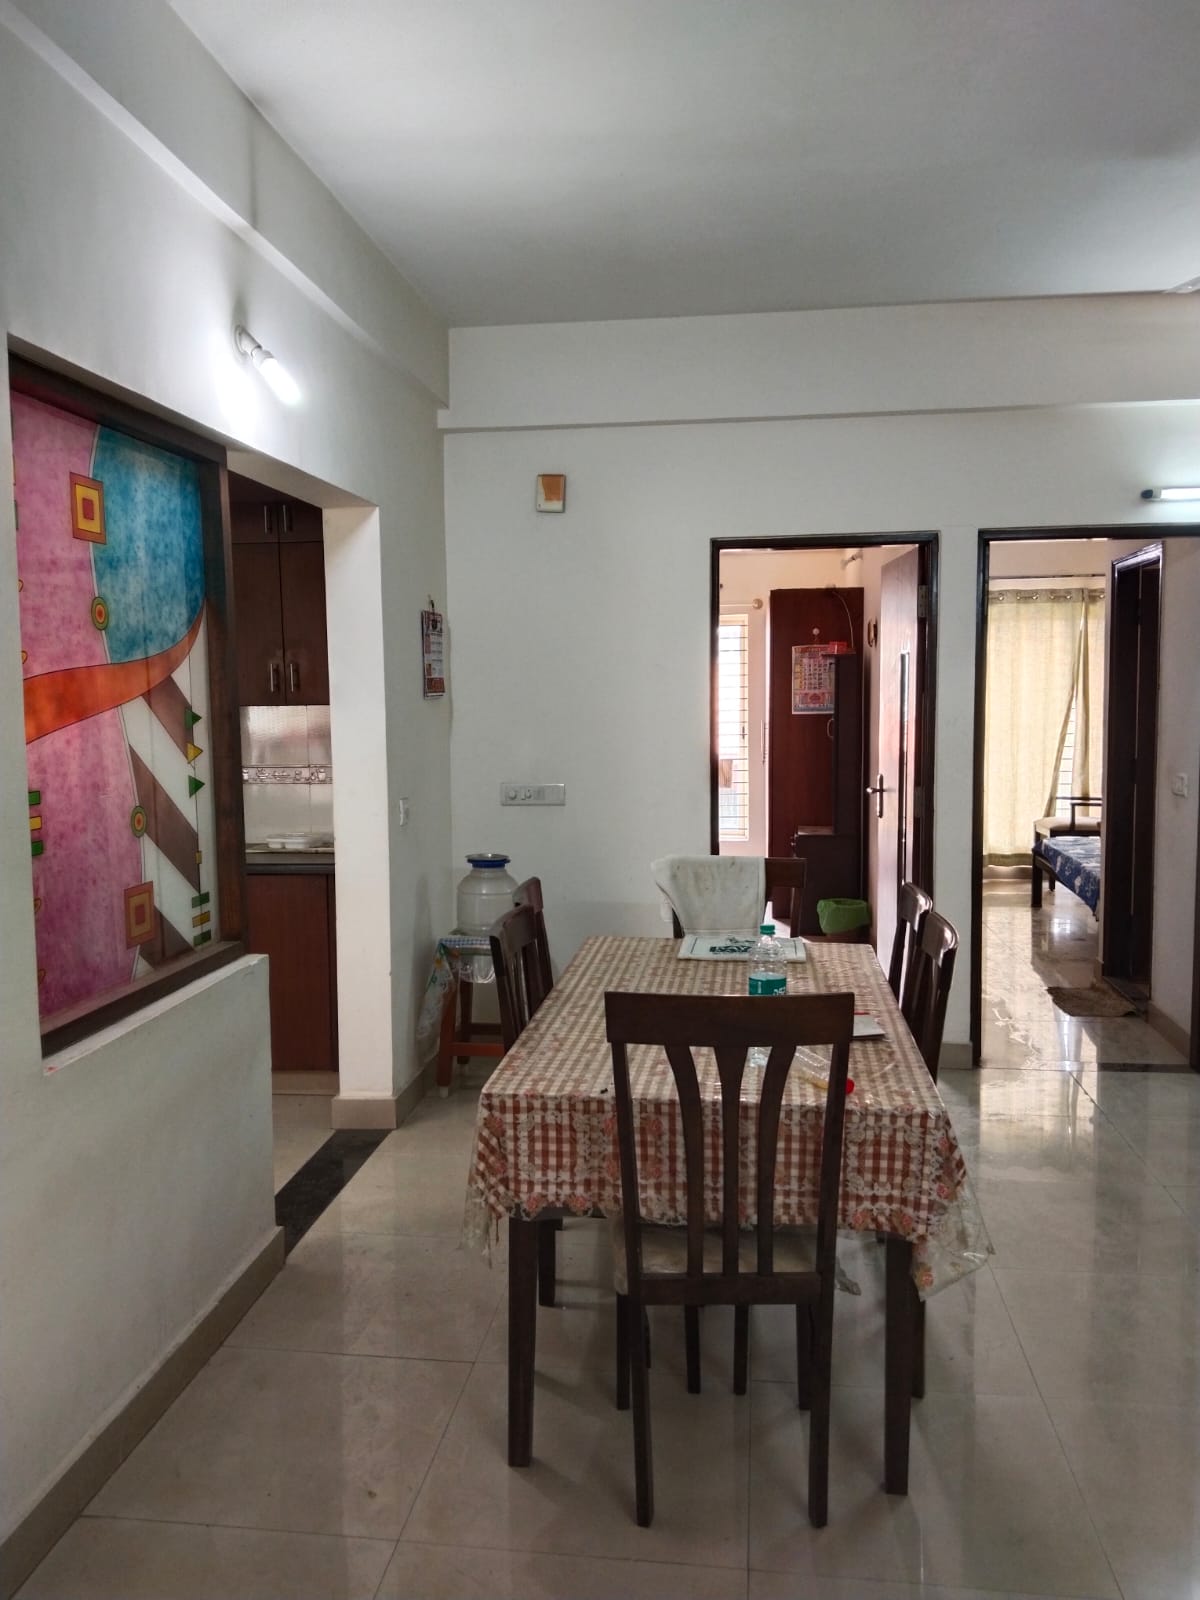 Flat for Rent in Cooke Town Bangalore Call 9845022178/9845923788